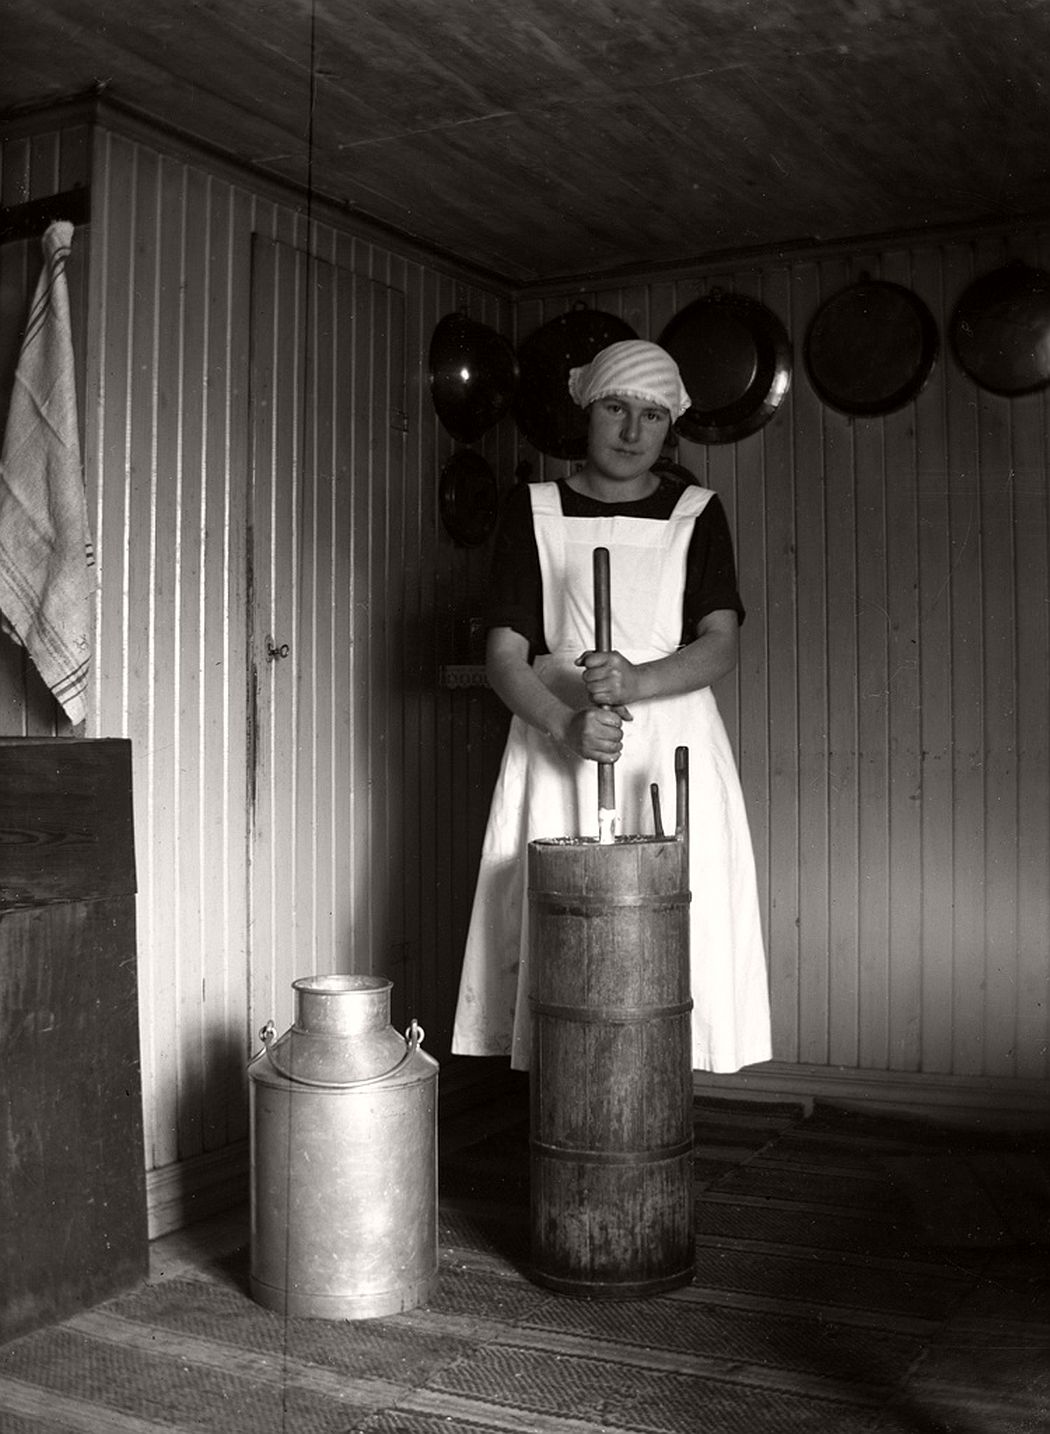 Ulla Göransson churning butter in the old way, ca 1920.